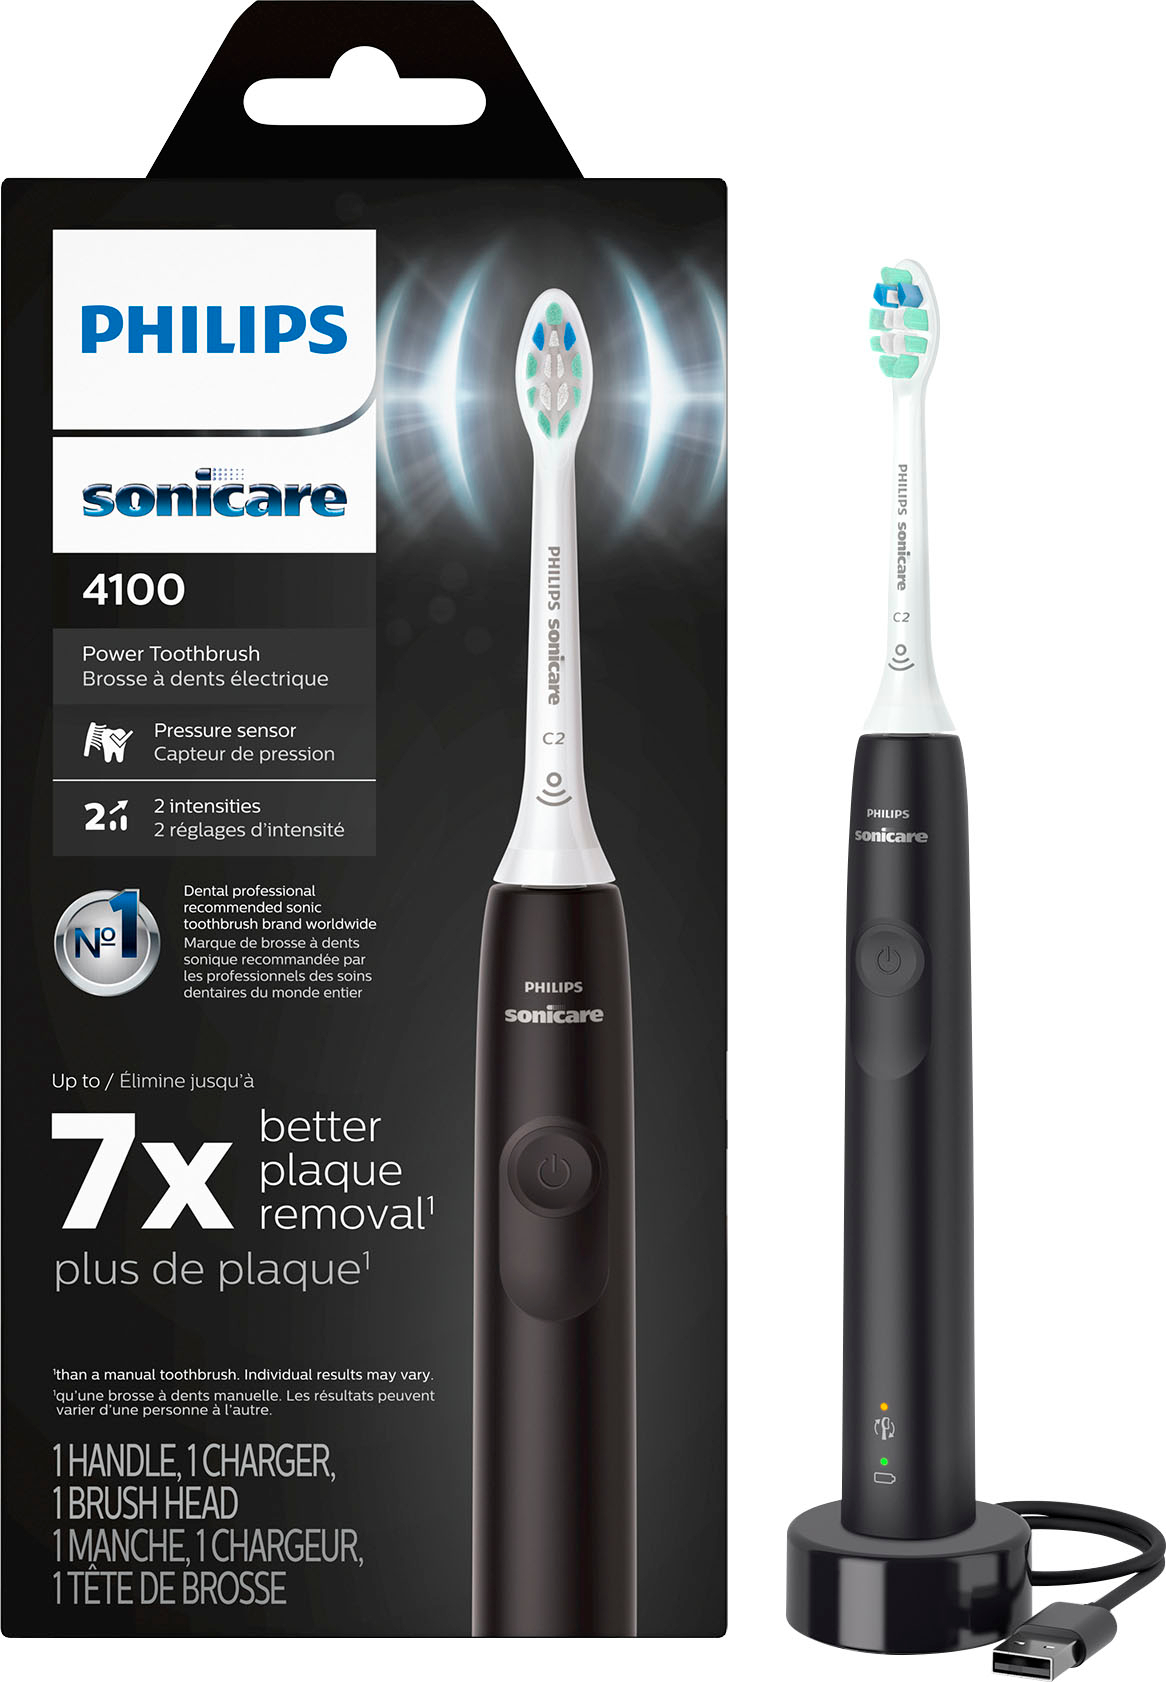 educate merchant cafeteria Philips Sonicare 4100 Power Toothbrush Black HX3681/24 - Best Buy